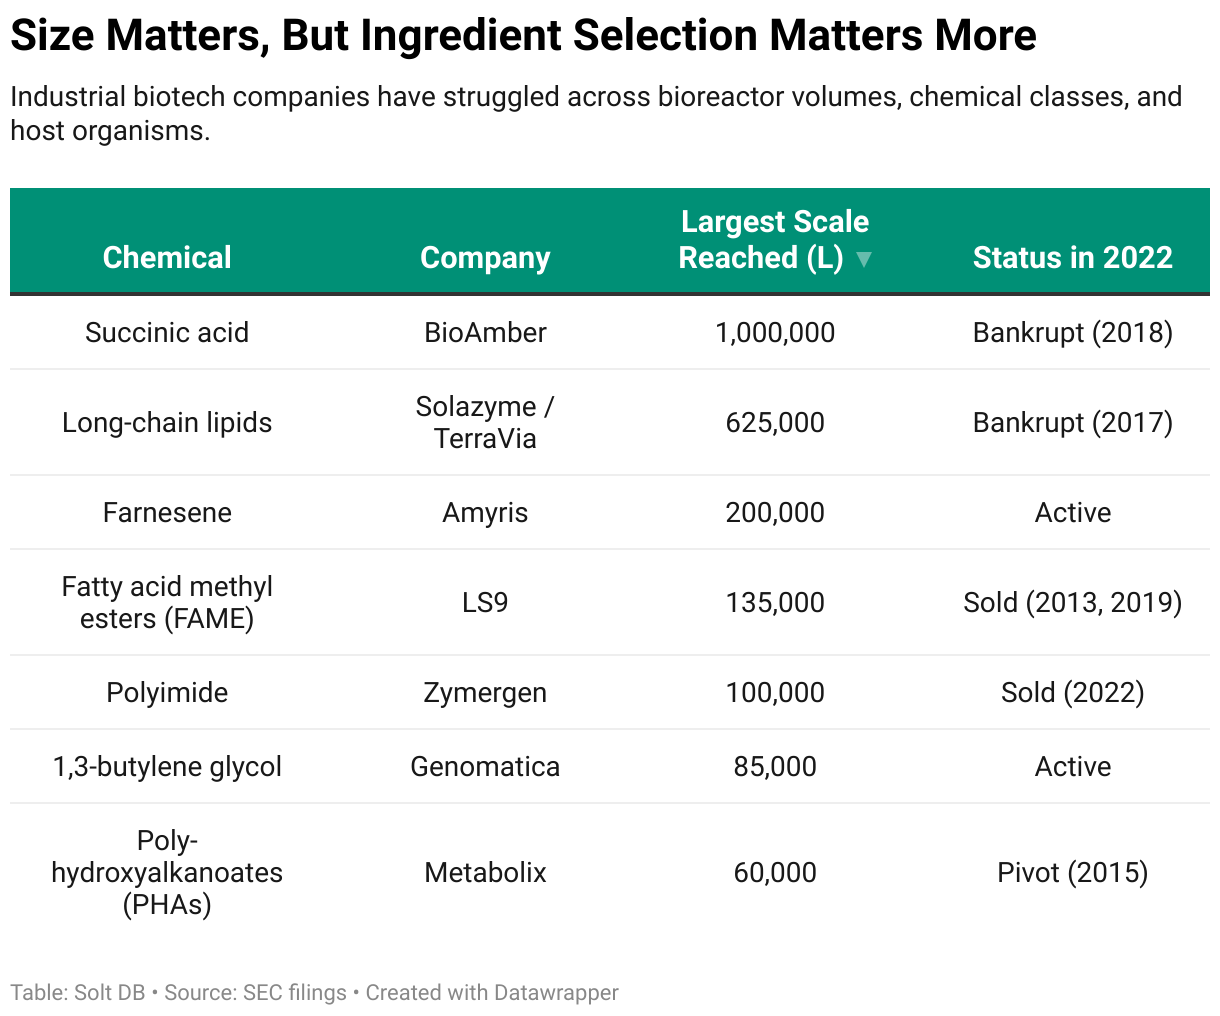 A table showing various ingredients produced by industrial biotech companies ranked by the volumes and status as of 2022.